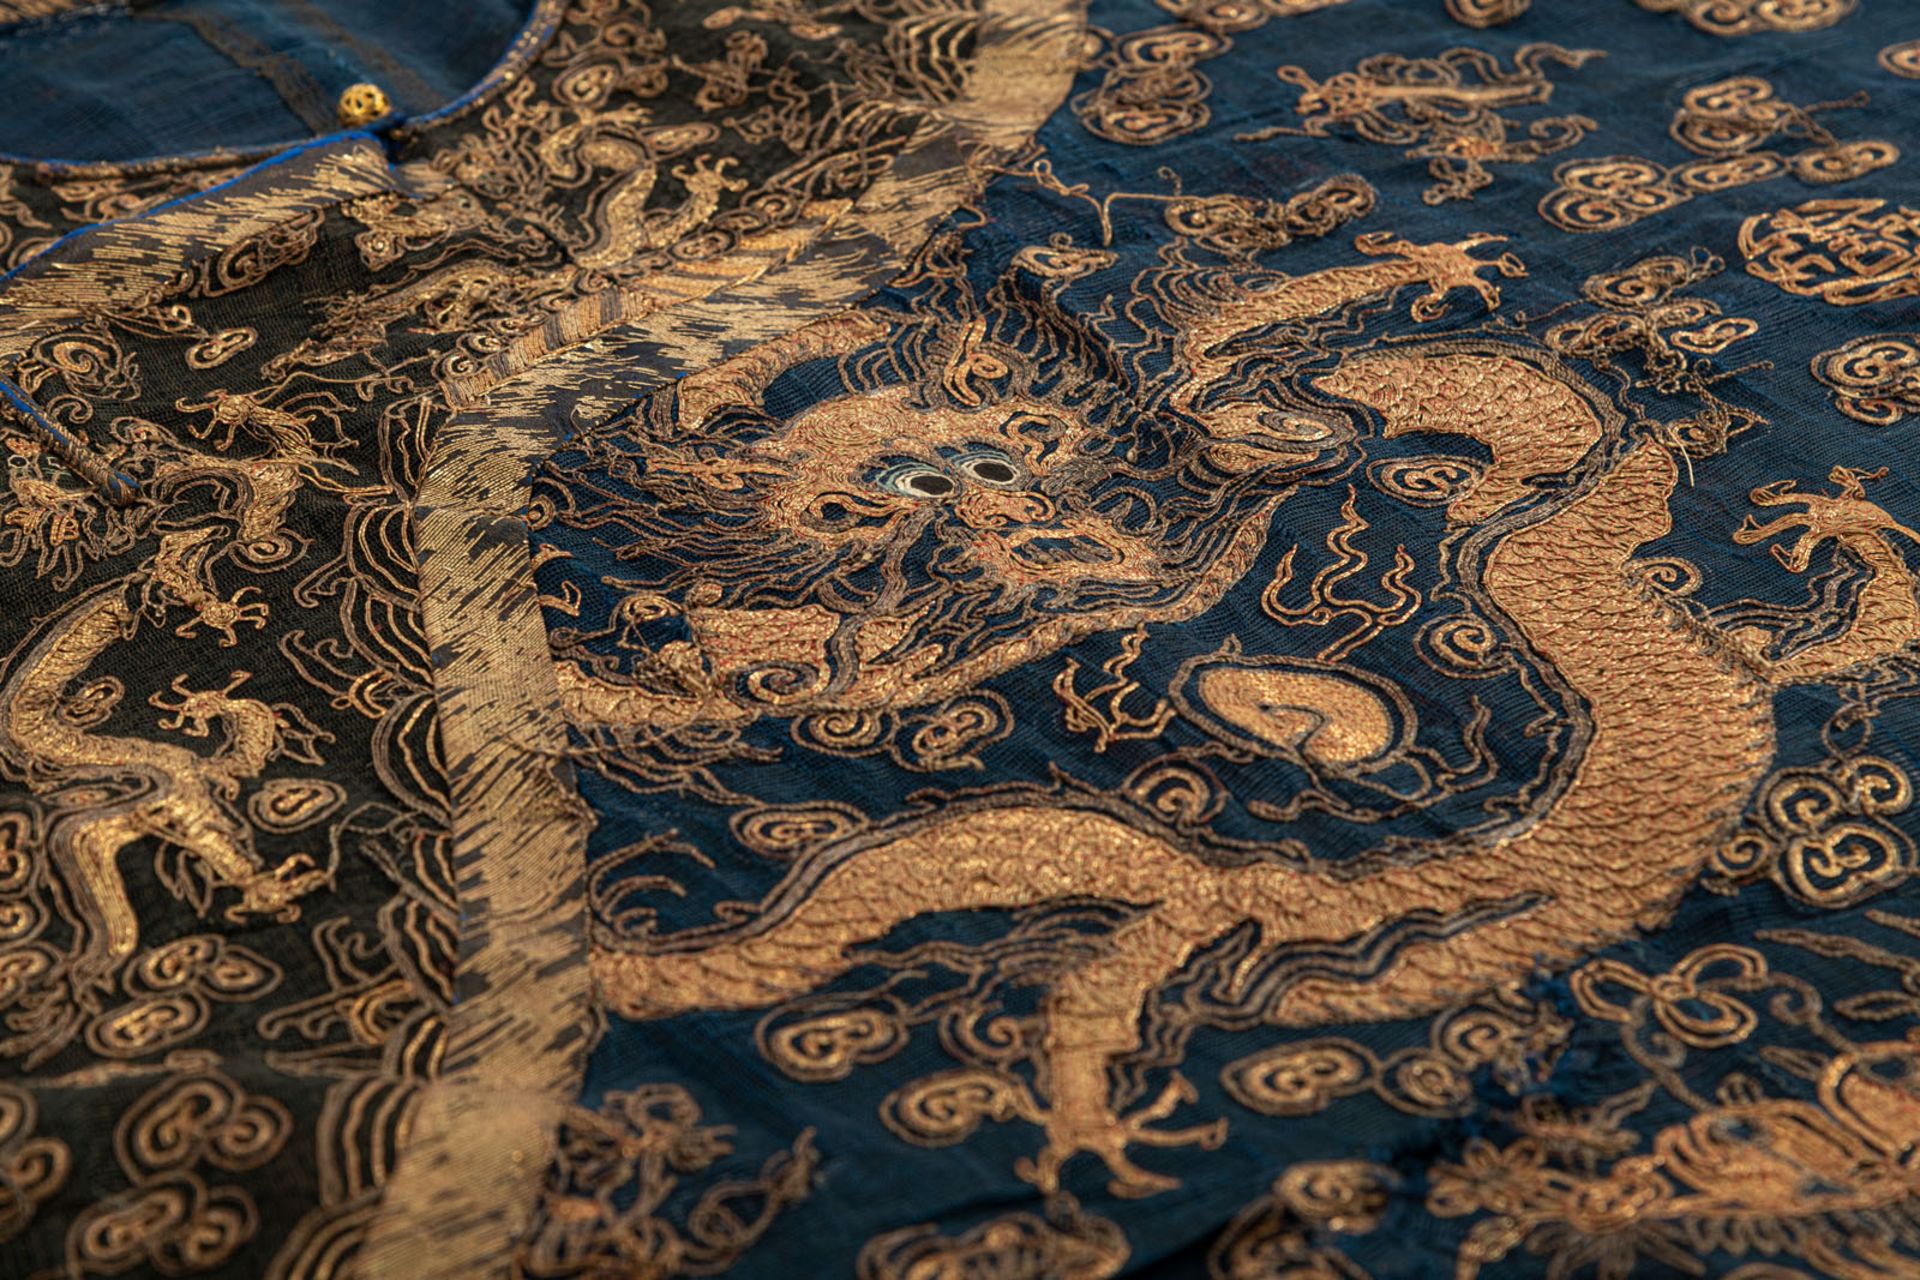 NAVY BLUE DRAGON ROBE (JIFU) IN SHA AND GOLD EMBROIDERY FOR A GENTLEMAN - Image 4 of 8